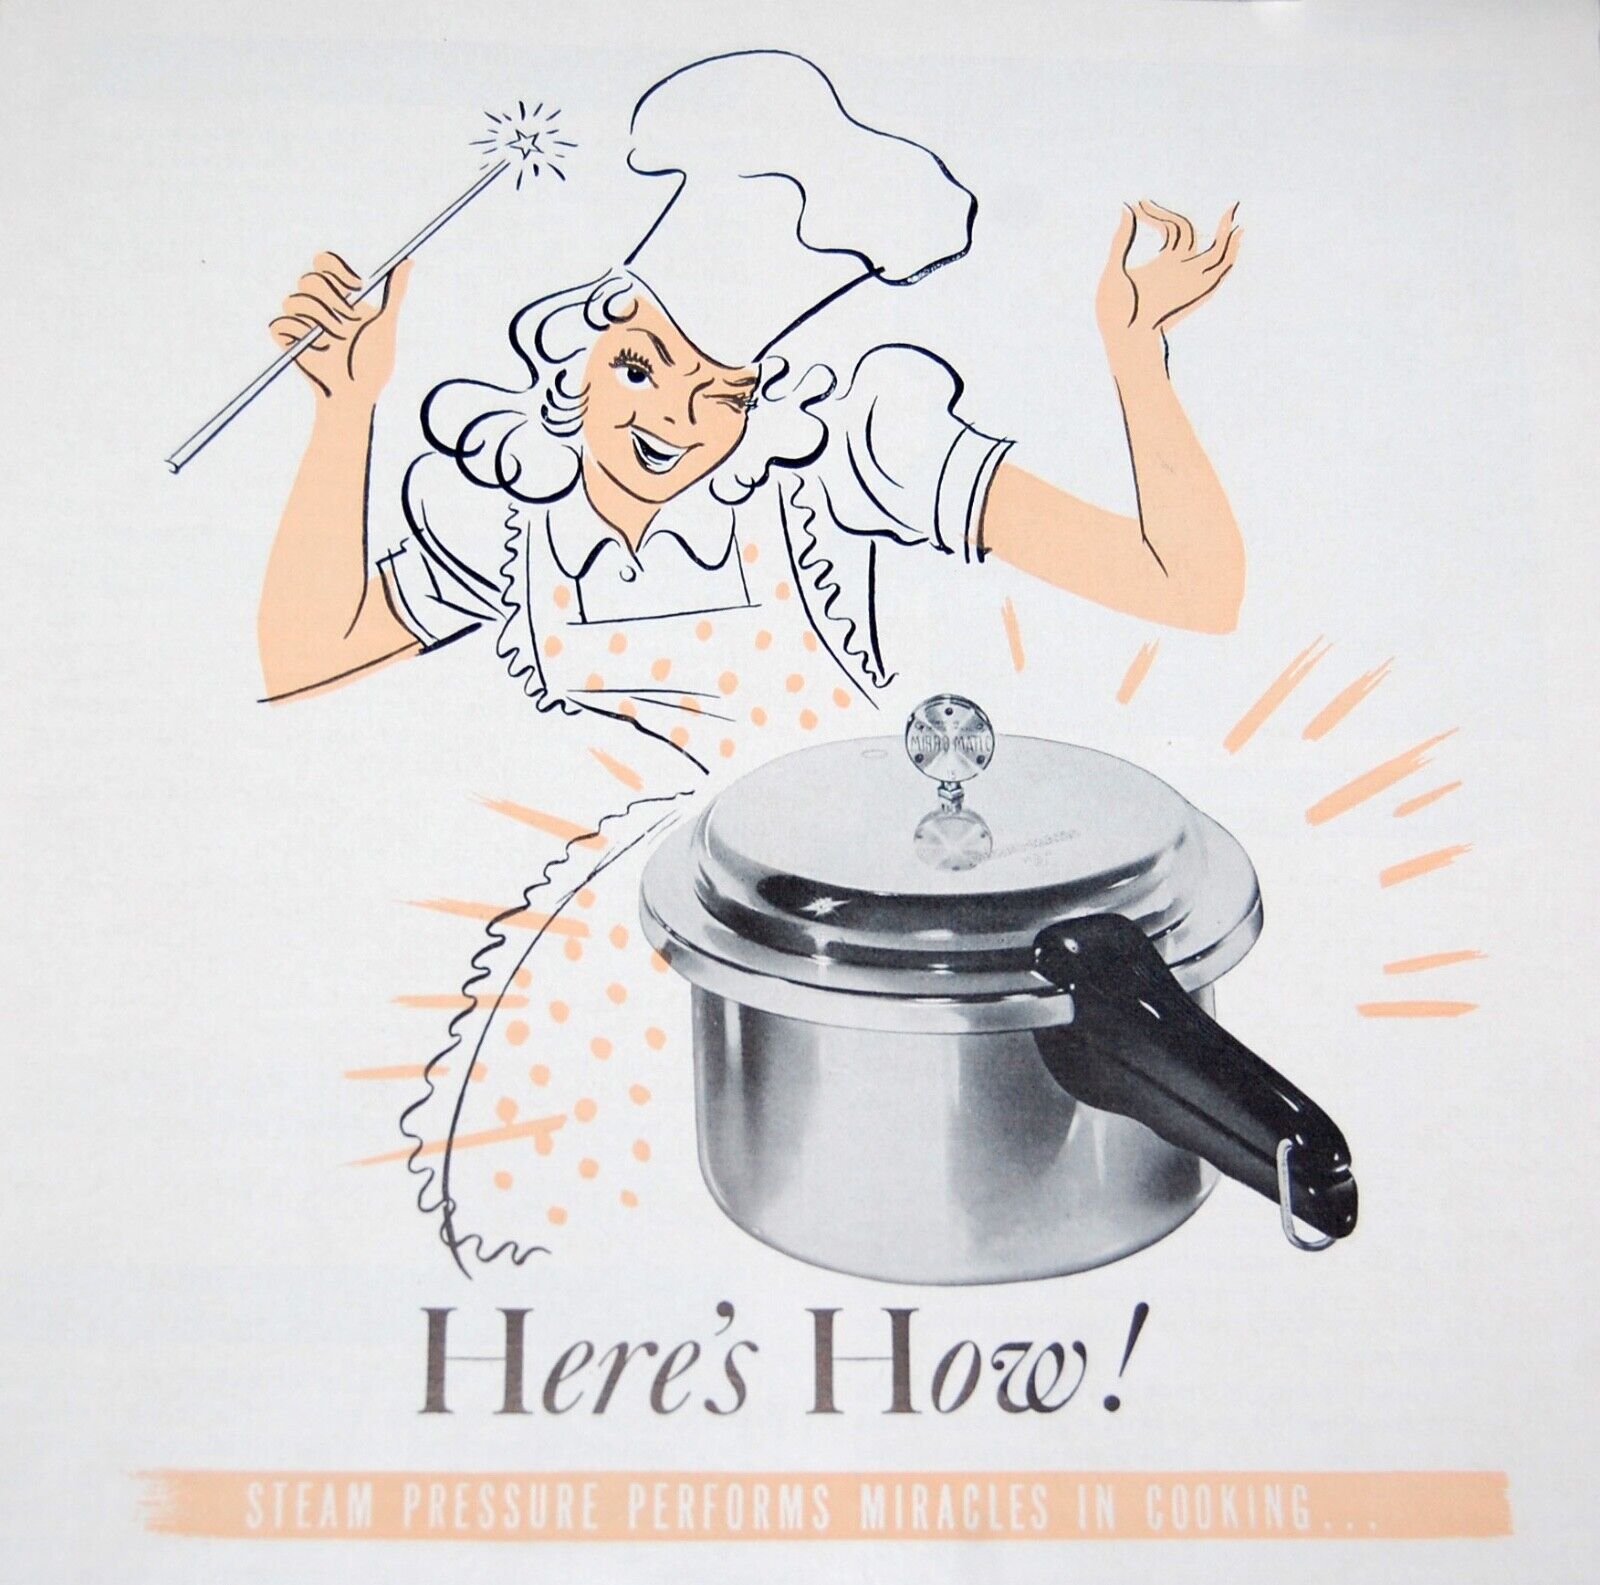 1955 Teaching Materials Home Economics by Mirro Aluminum for PRESSURE COOKING